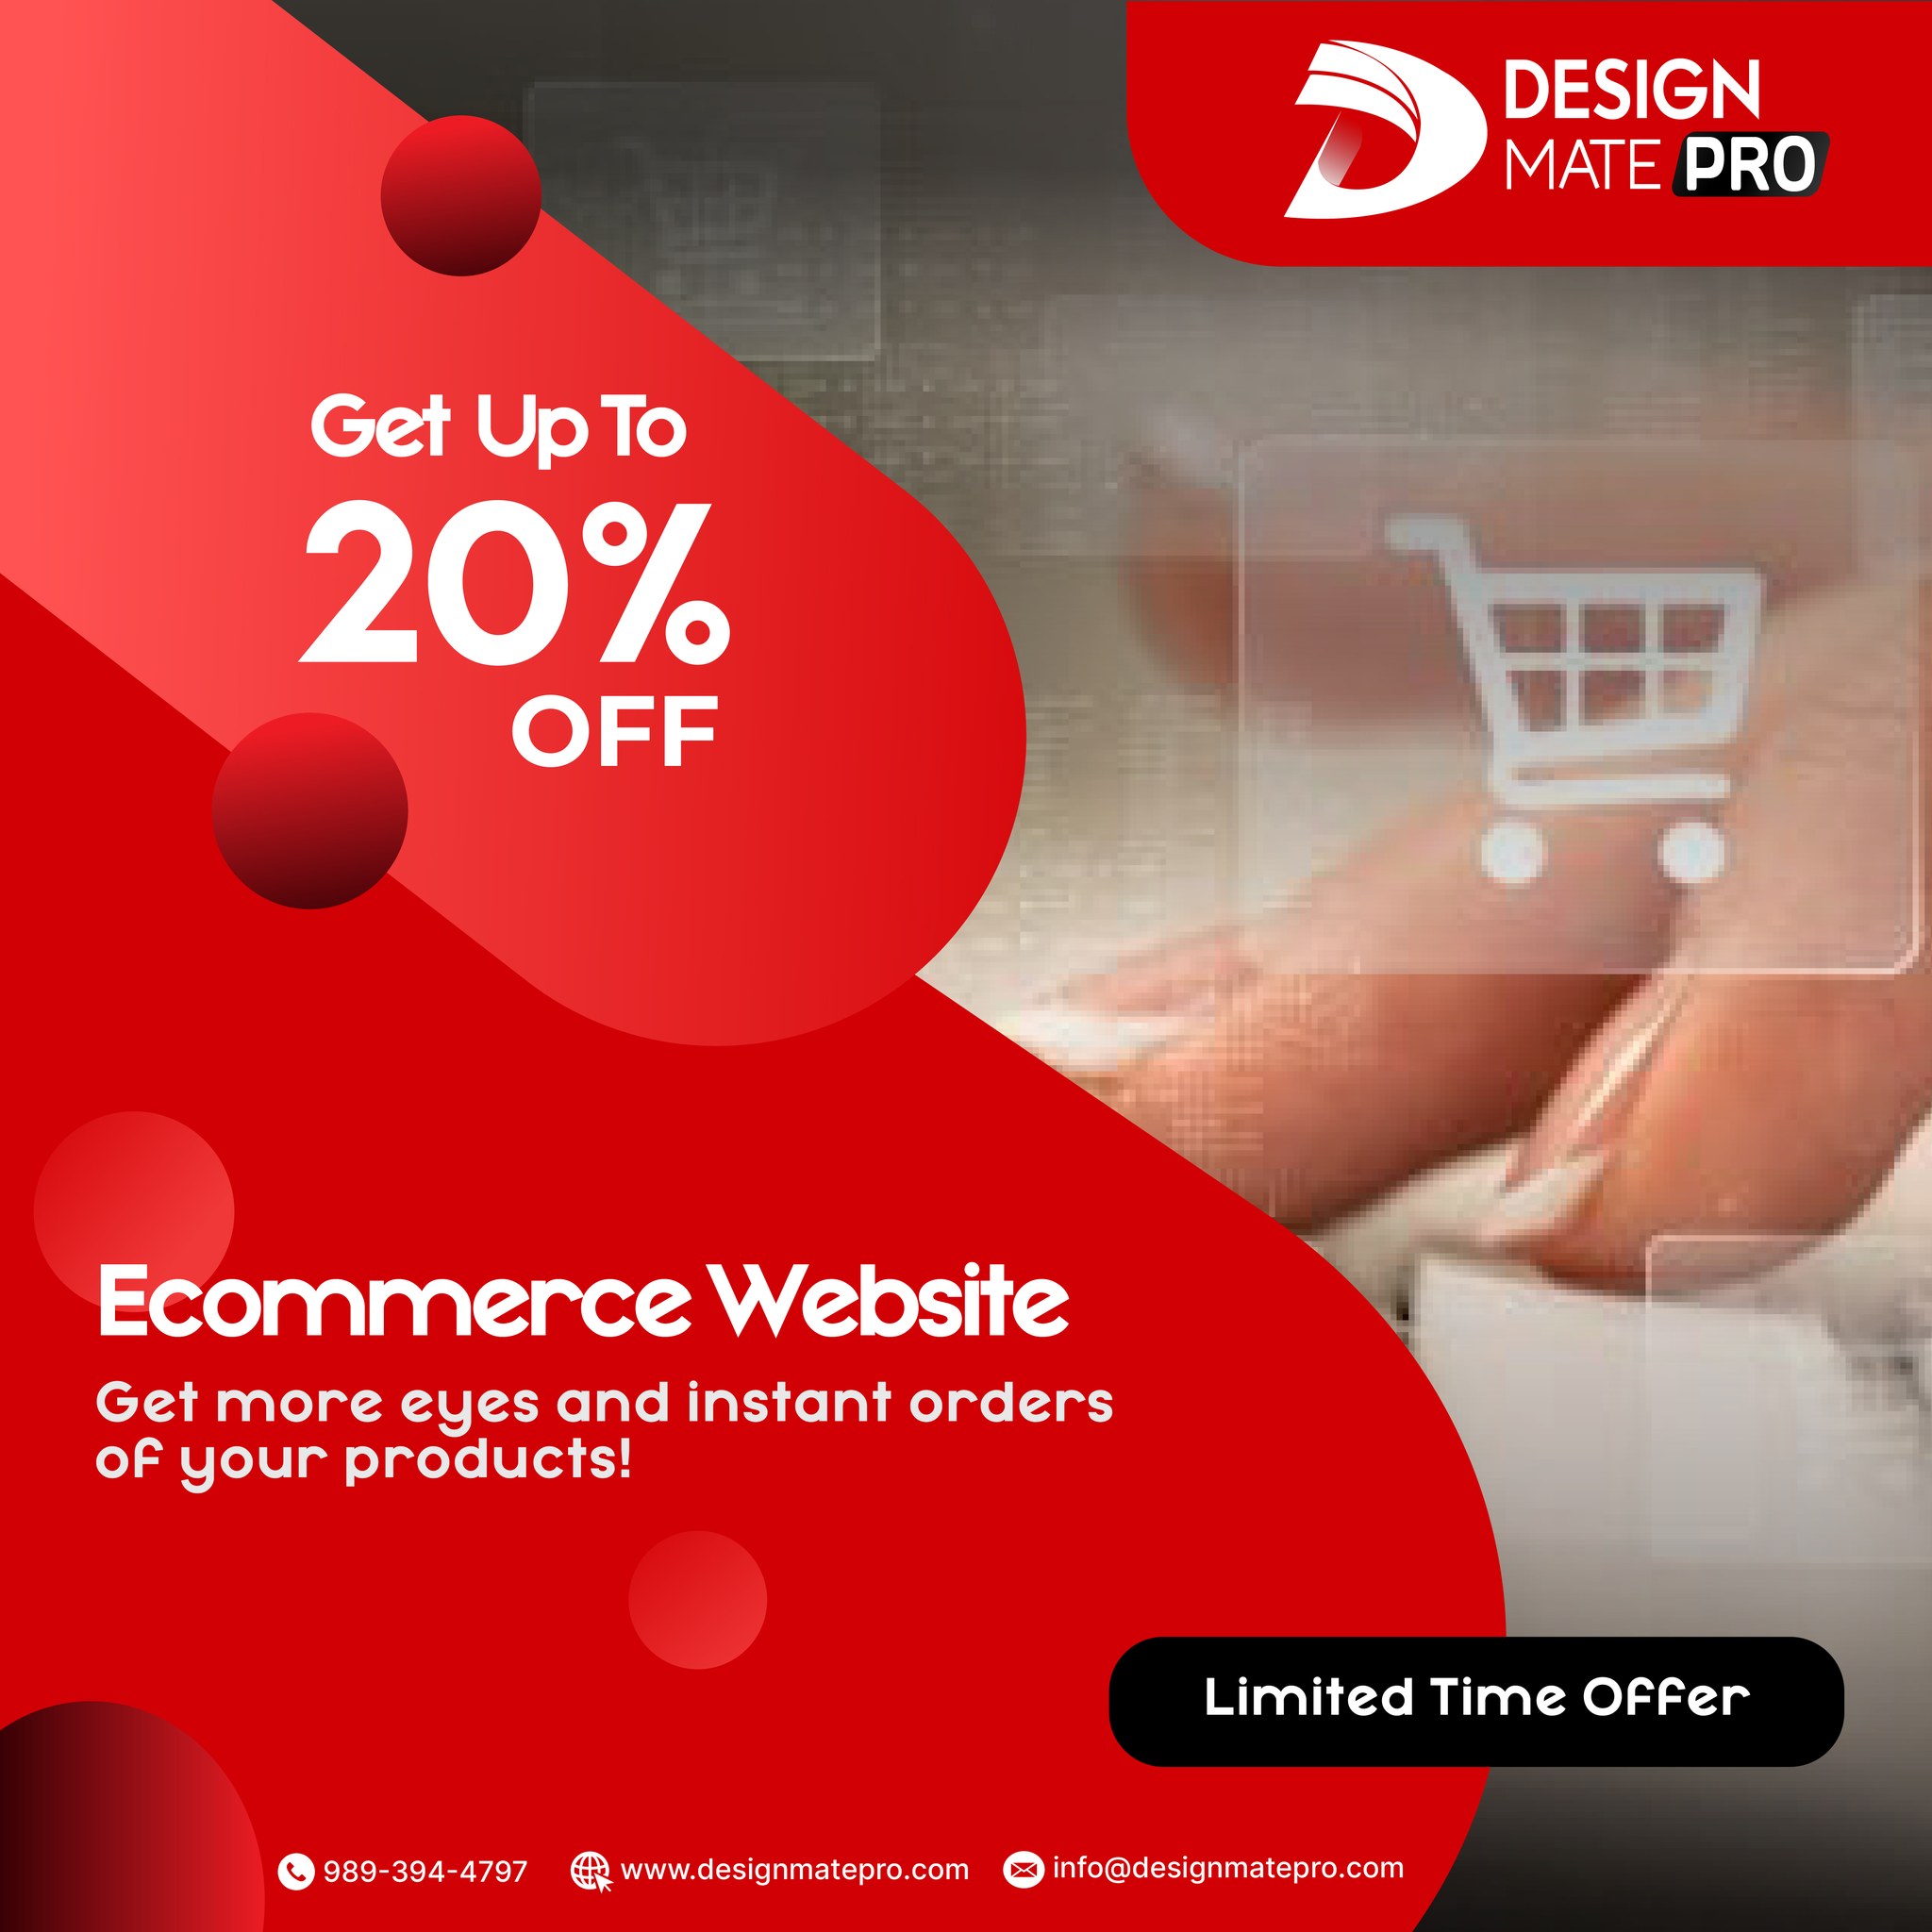 Ecommerce Website Services in Clifton, NJ